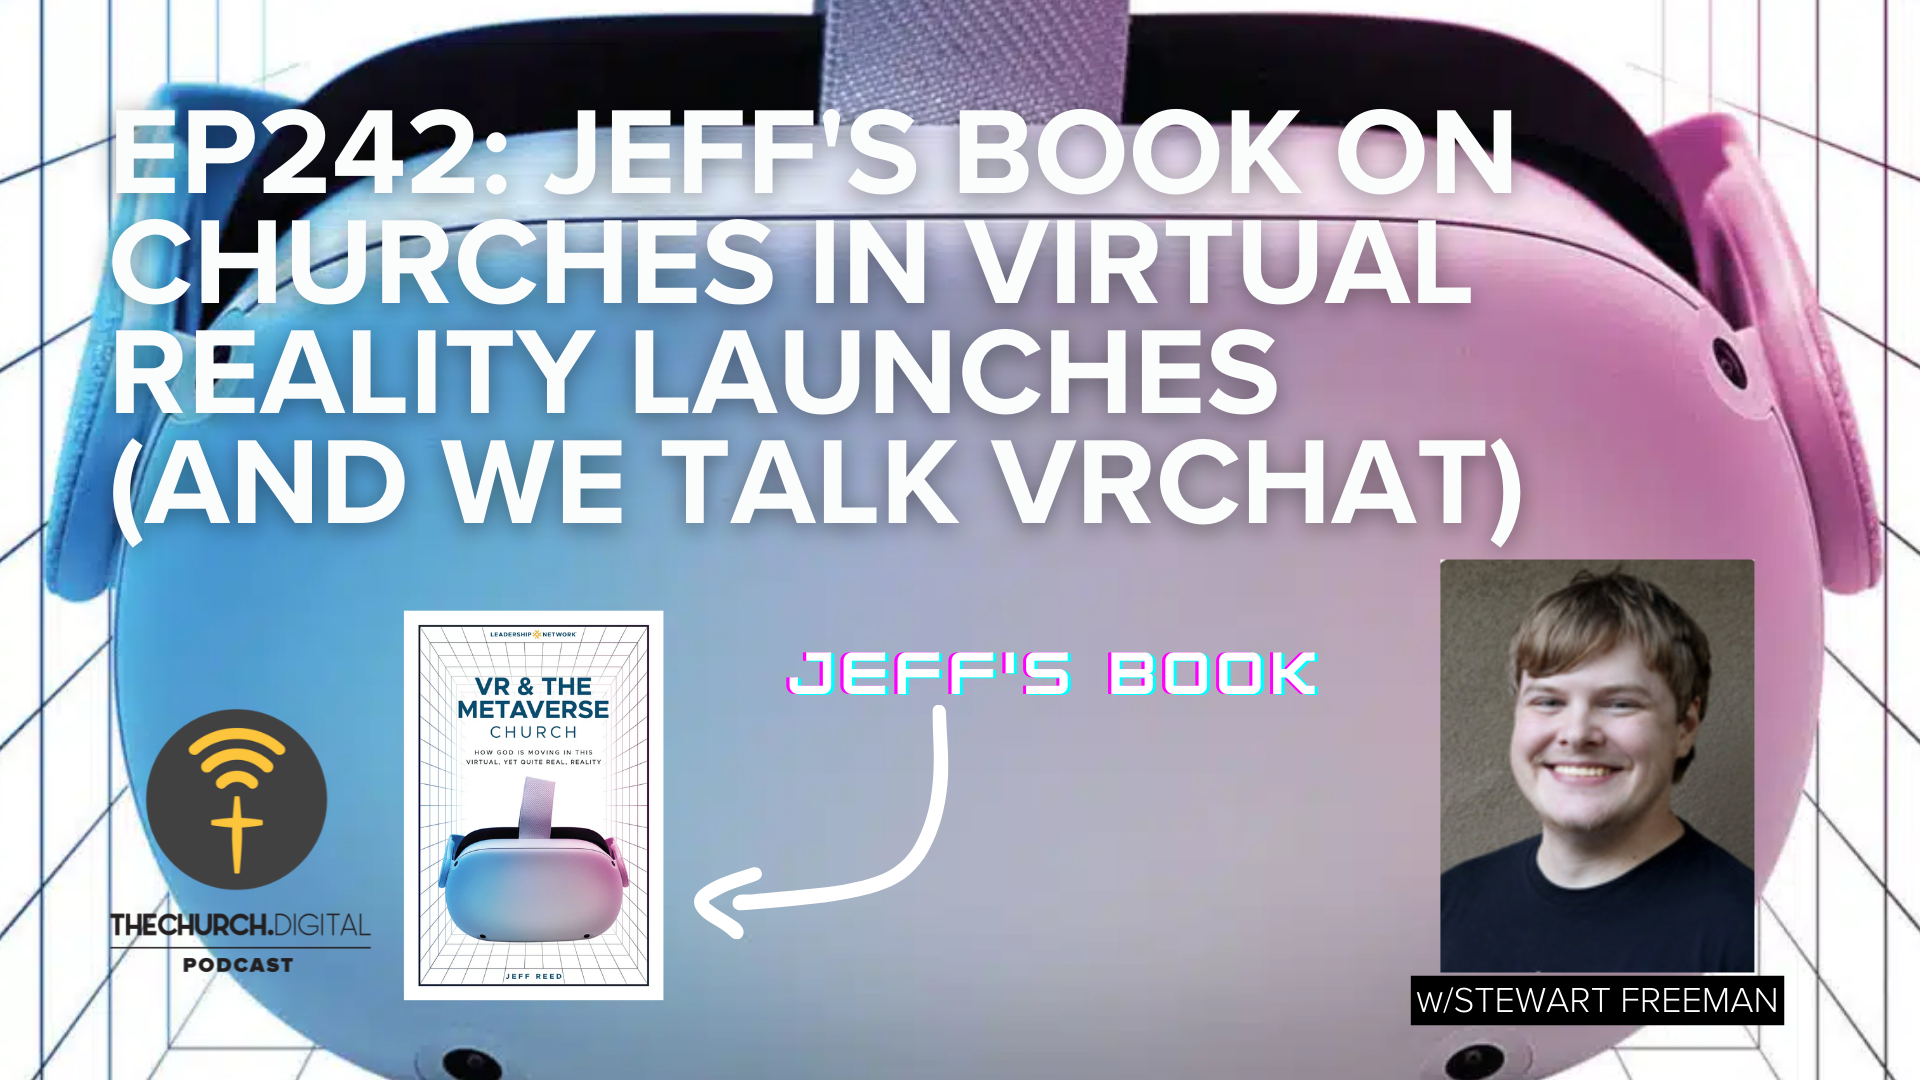 EP242: Jeff’s Book on Churches in Virtual Reality Launches (and We Talk VRchat)